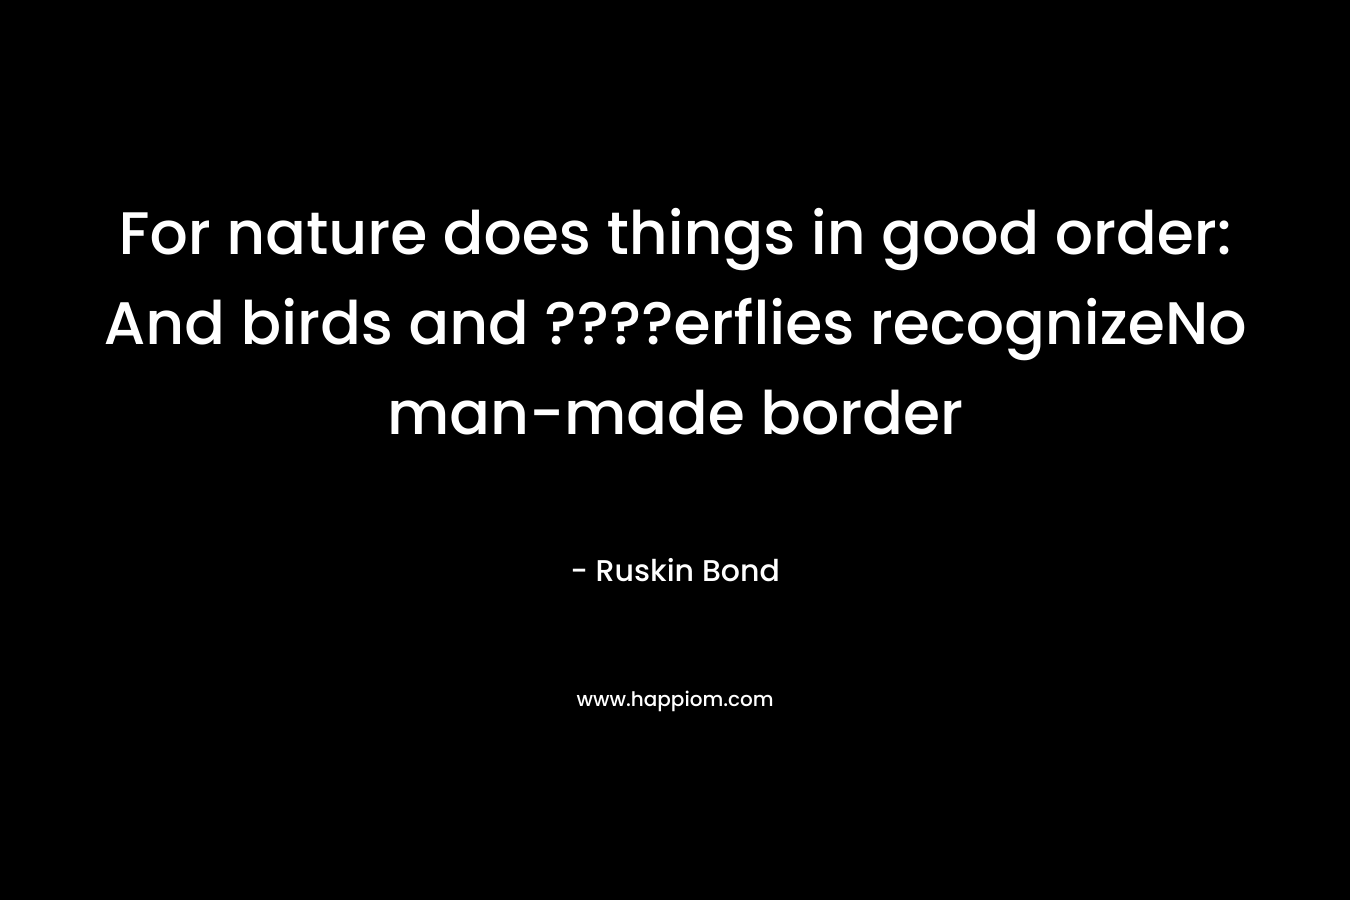 For nature does things in good order: And birds and ????erflies recognizeNo man-made border – Ruskin Bond